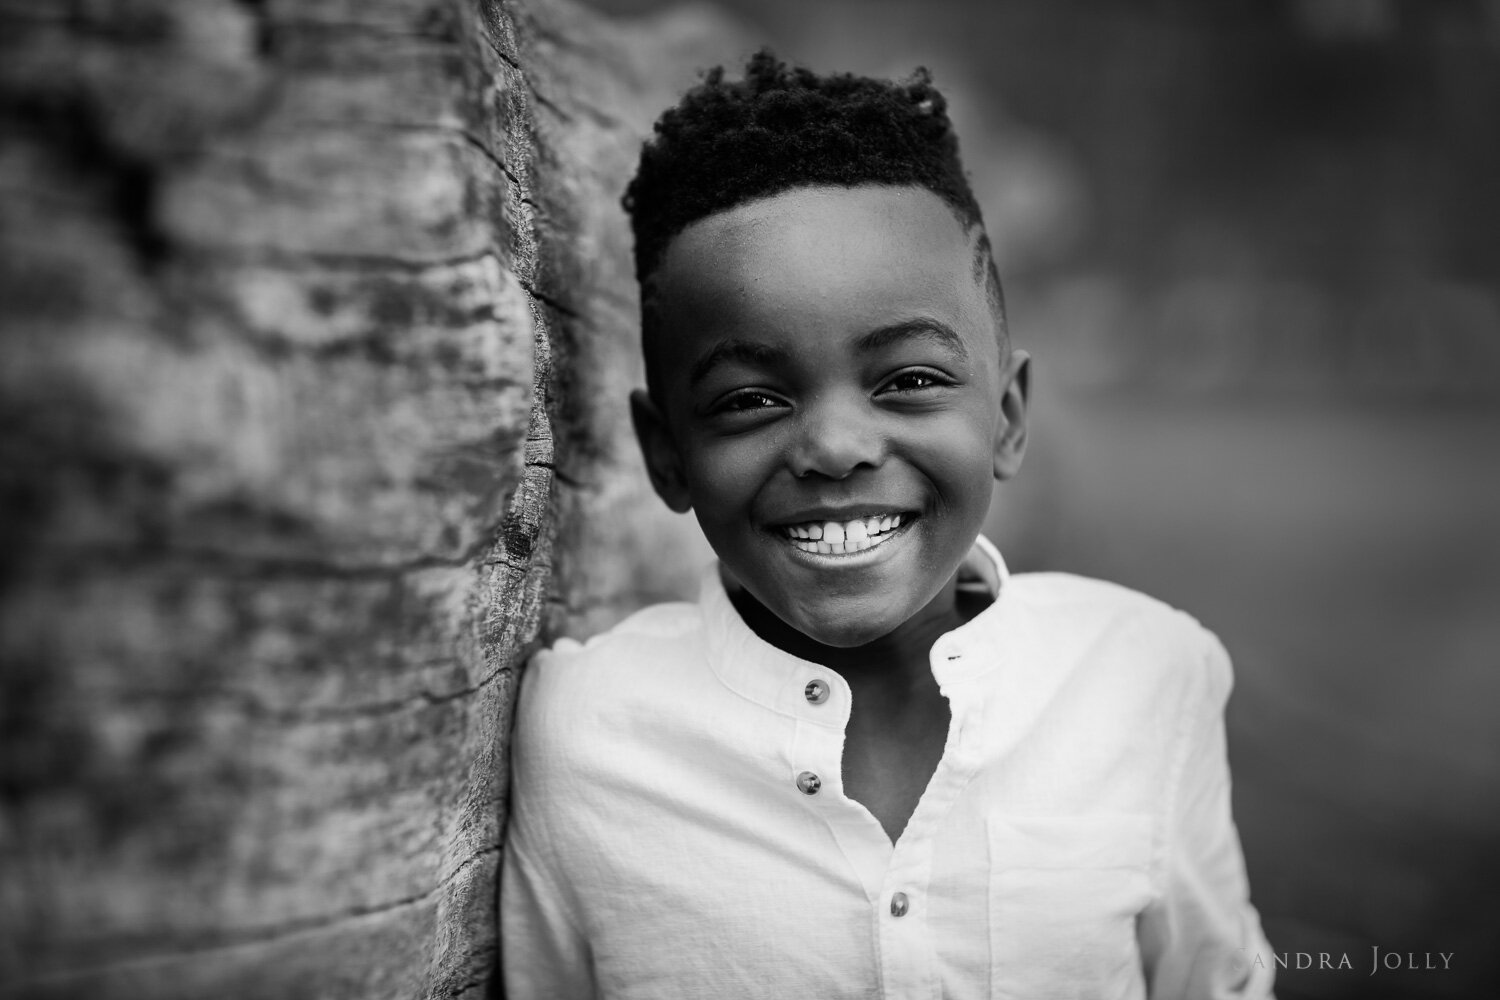 black-and-white-portrait-of-young-boy-by-stockholm-photographer-sandra-jolly.jpg